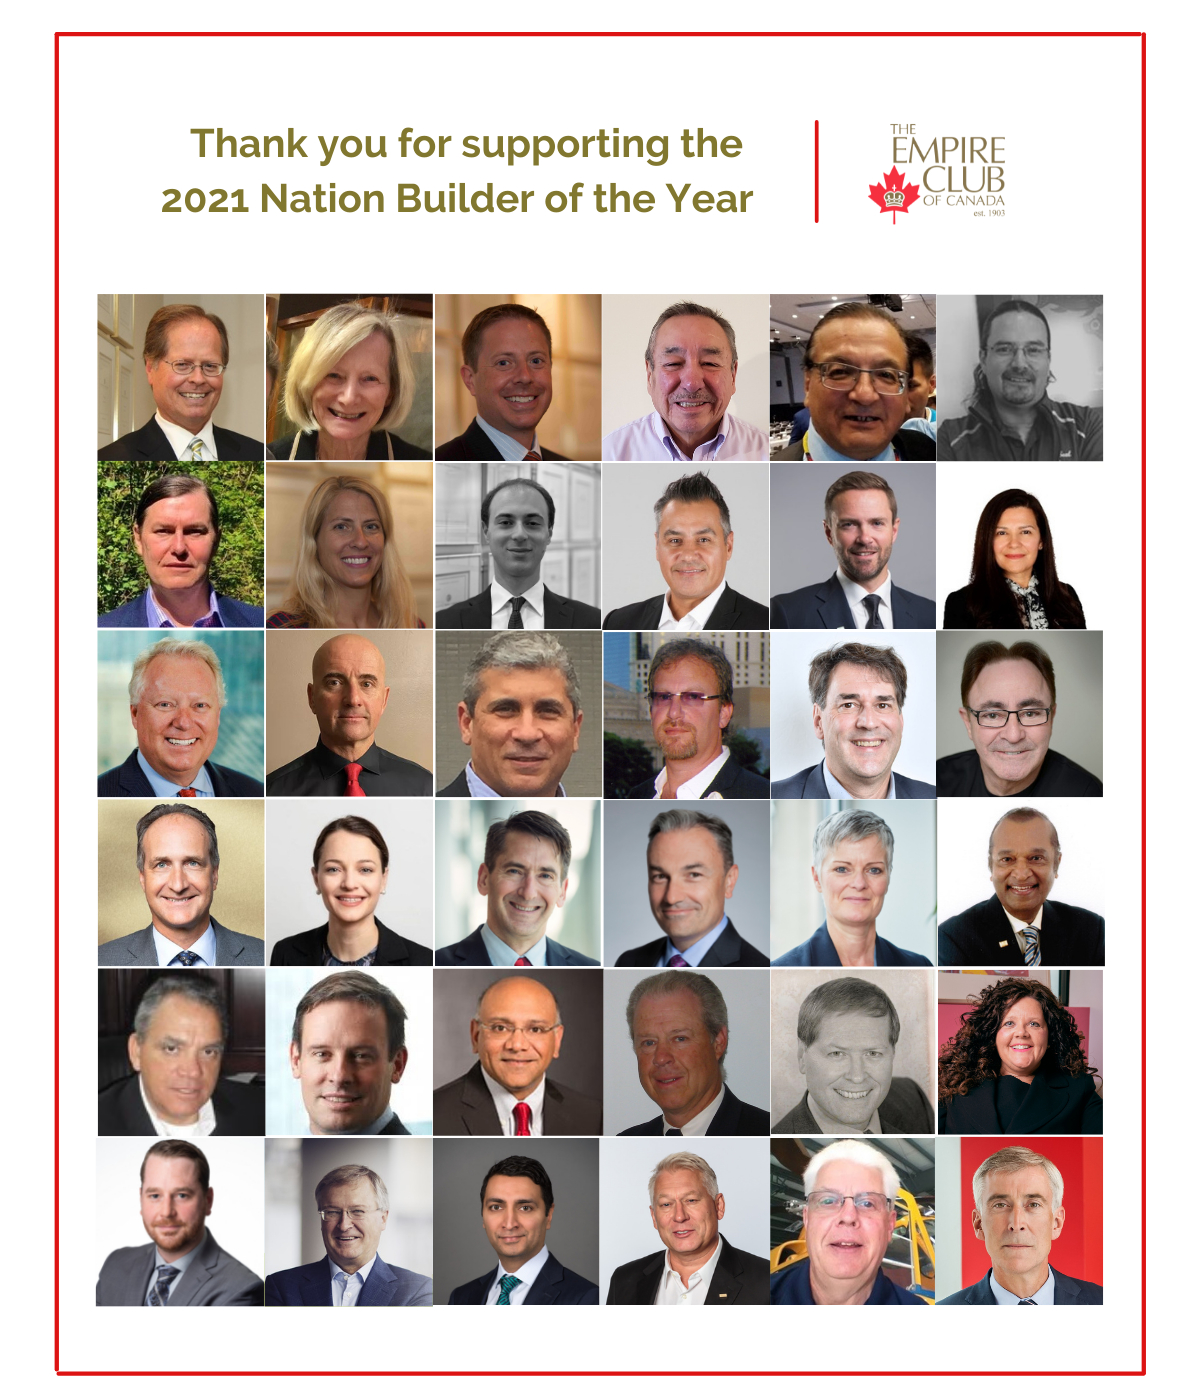 alt= A collage of smiling Empire Club of Canada members titled "Thank you for supporting the 2021 Nation Builder of the Year".